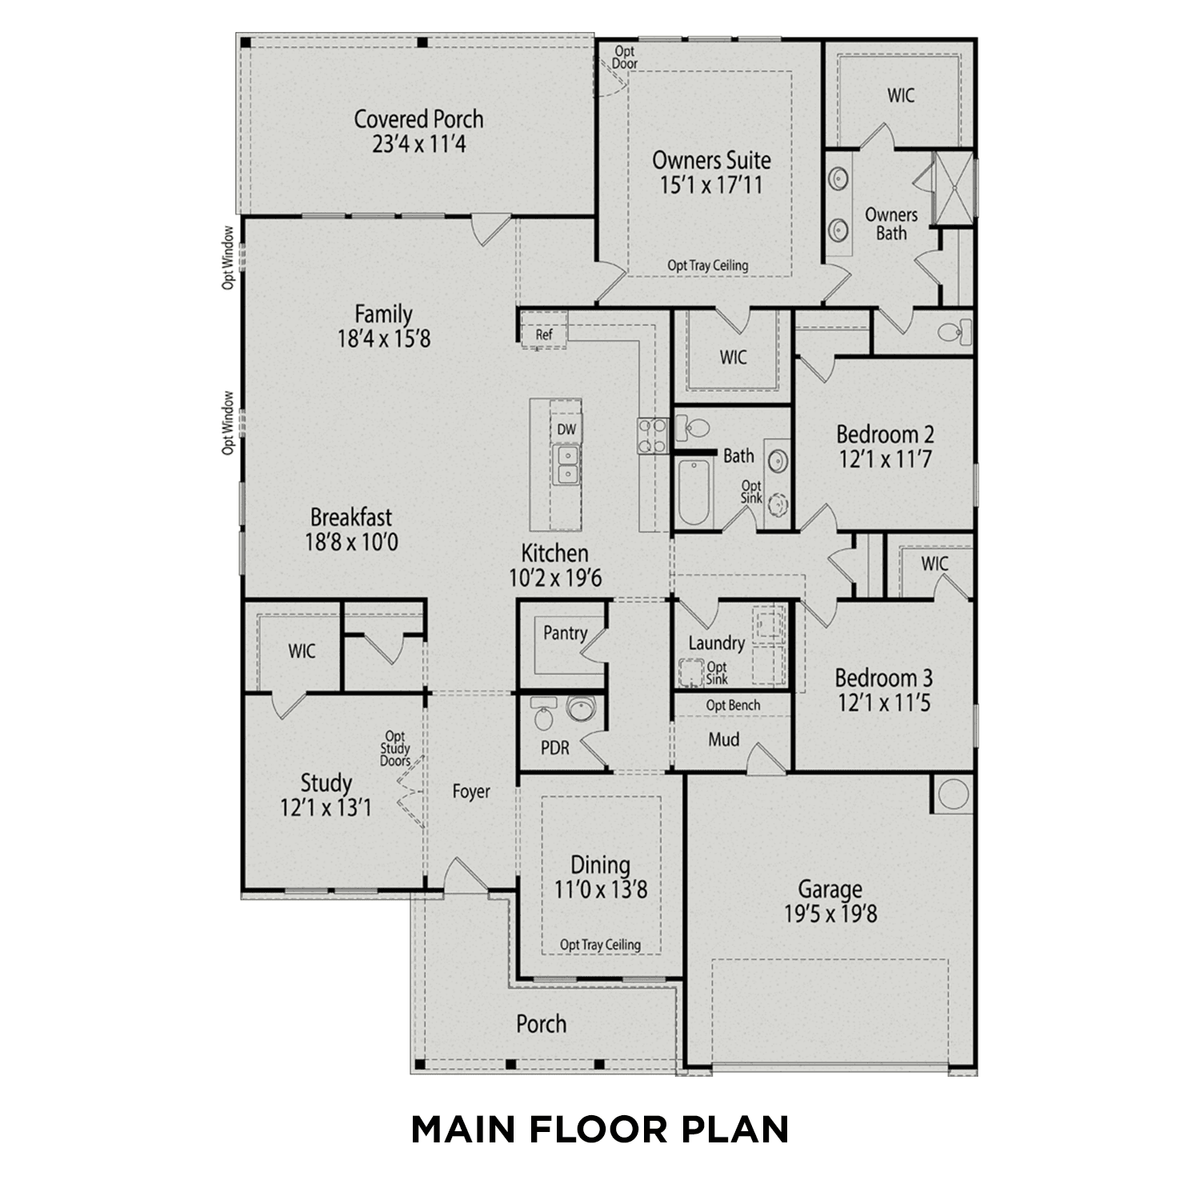 1 - The Magnolia A floor plan layout for 30 Song Breeze Circle in Davidson Homes' Weatherford East community.